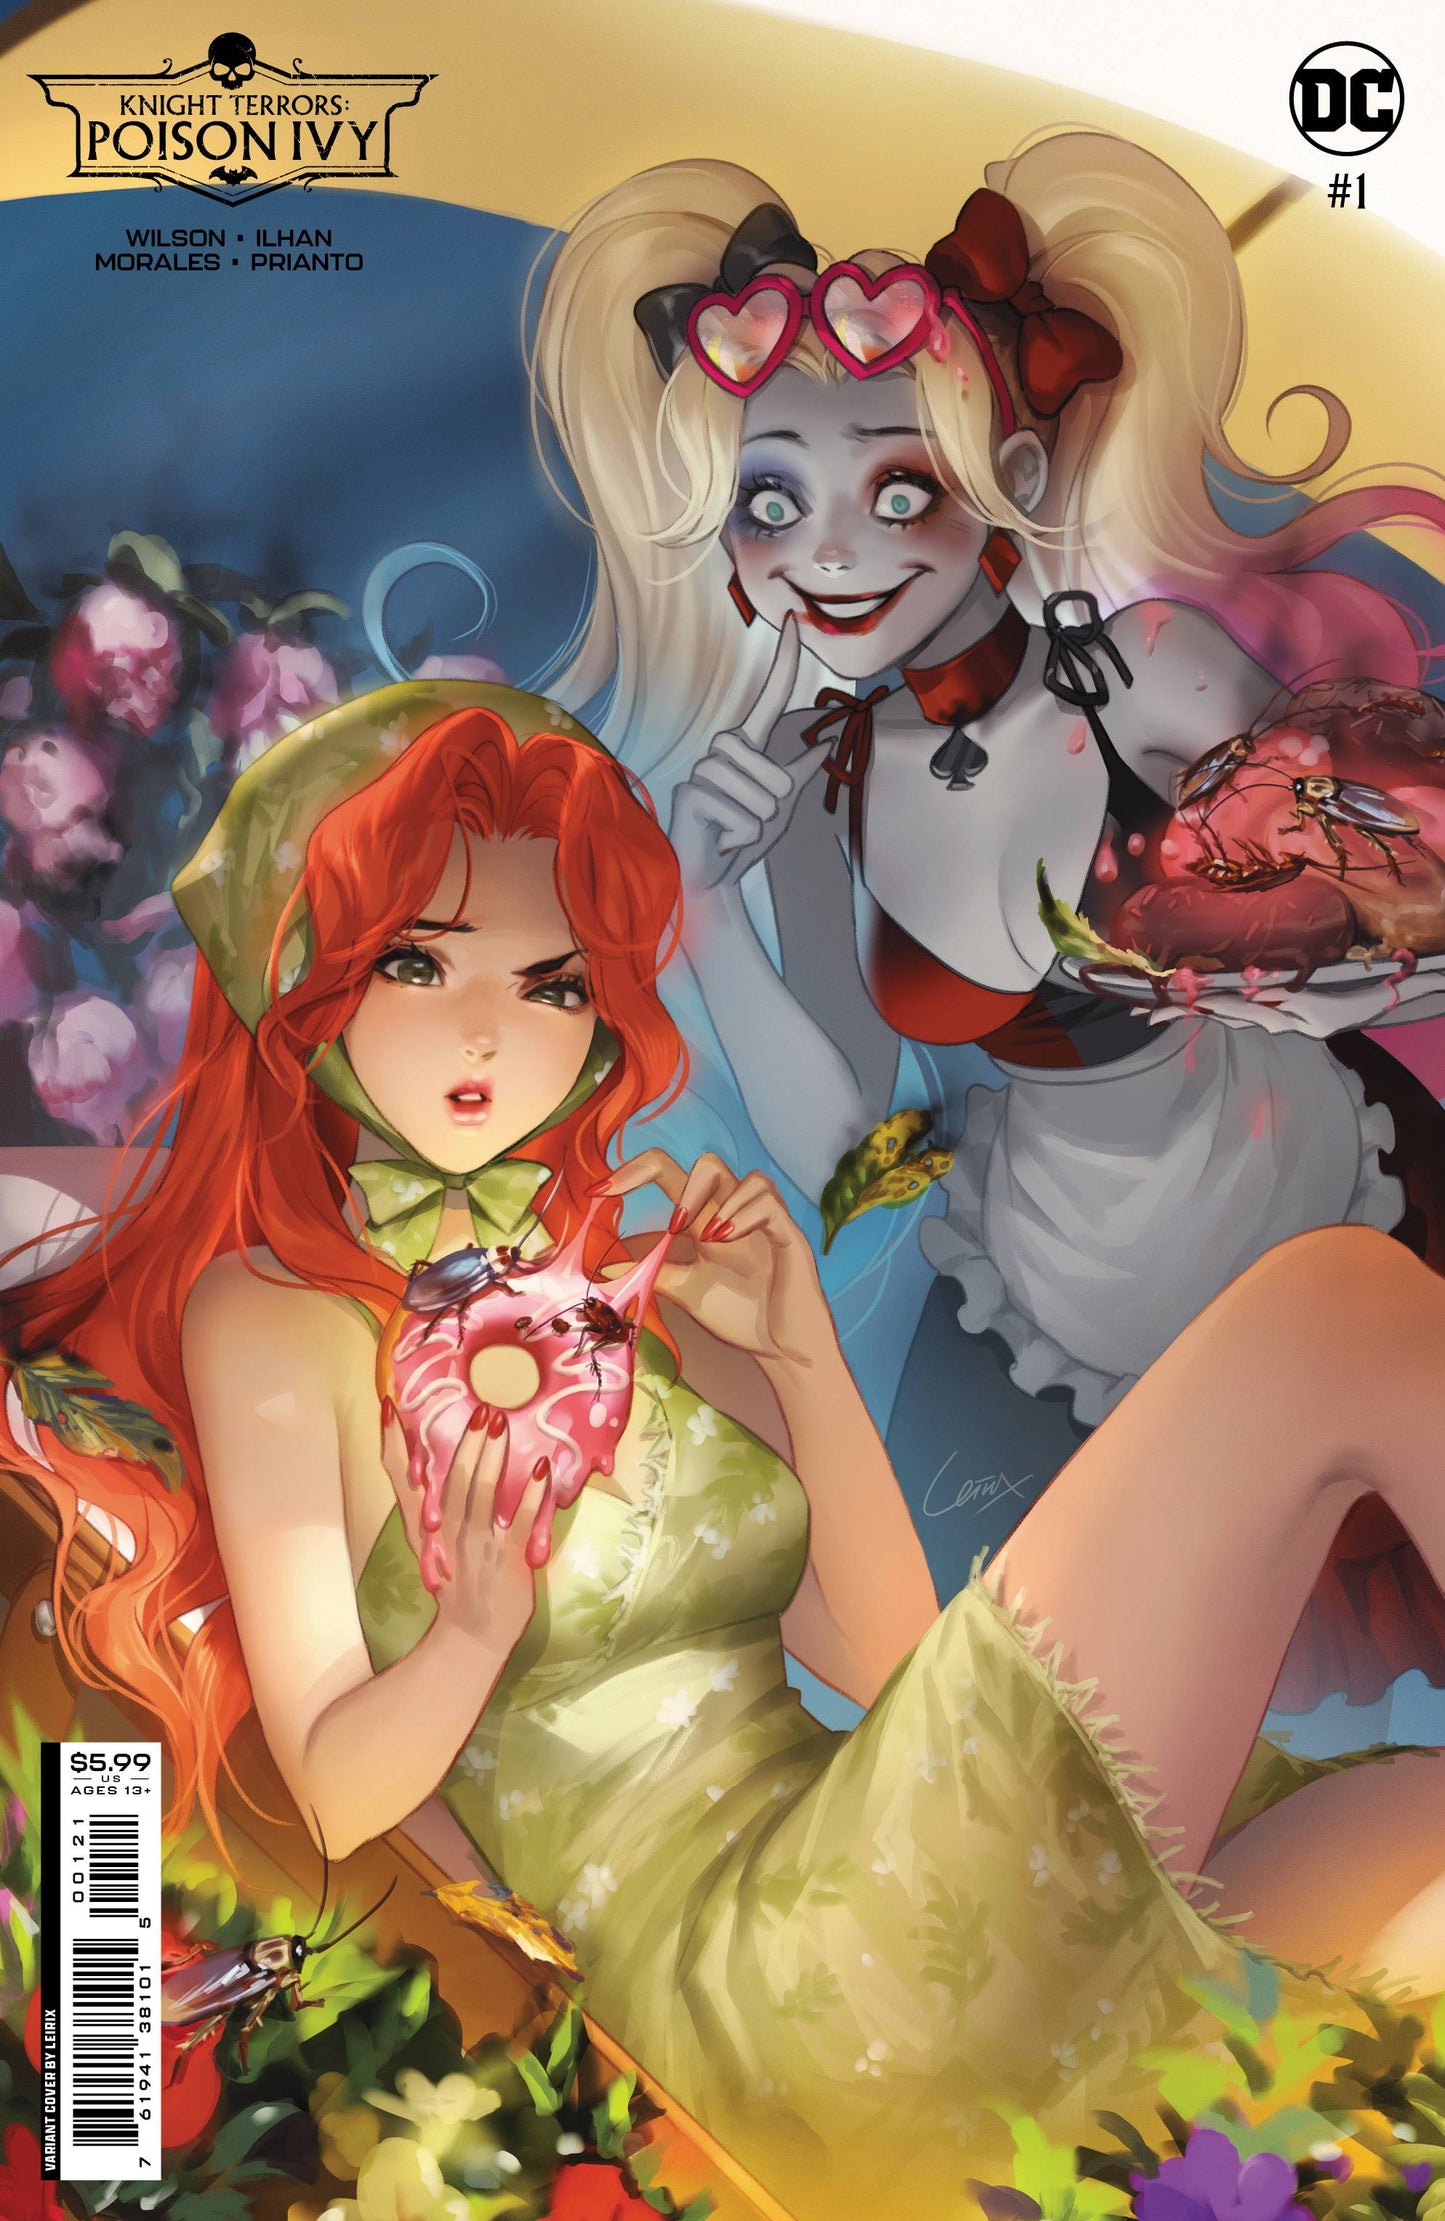 KNIGHT TERRORS POISON IVY #1 (OF 2)